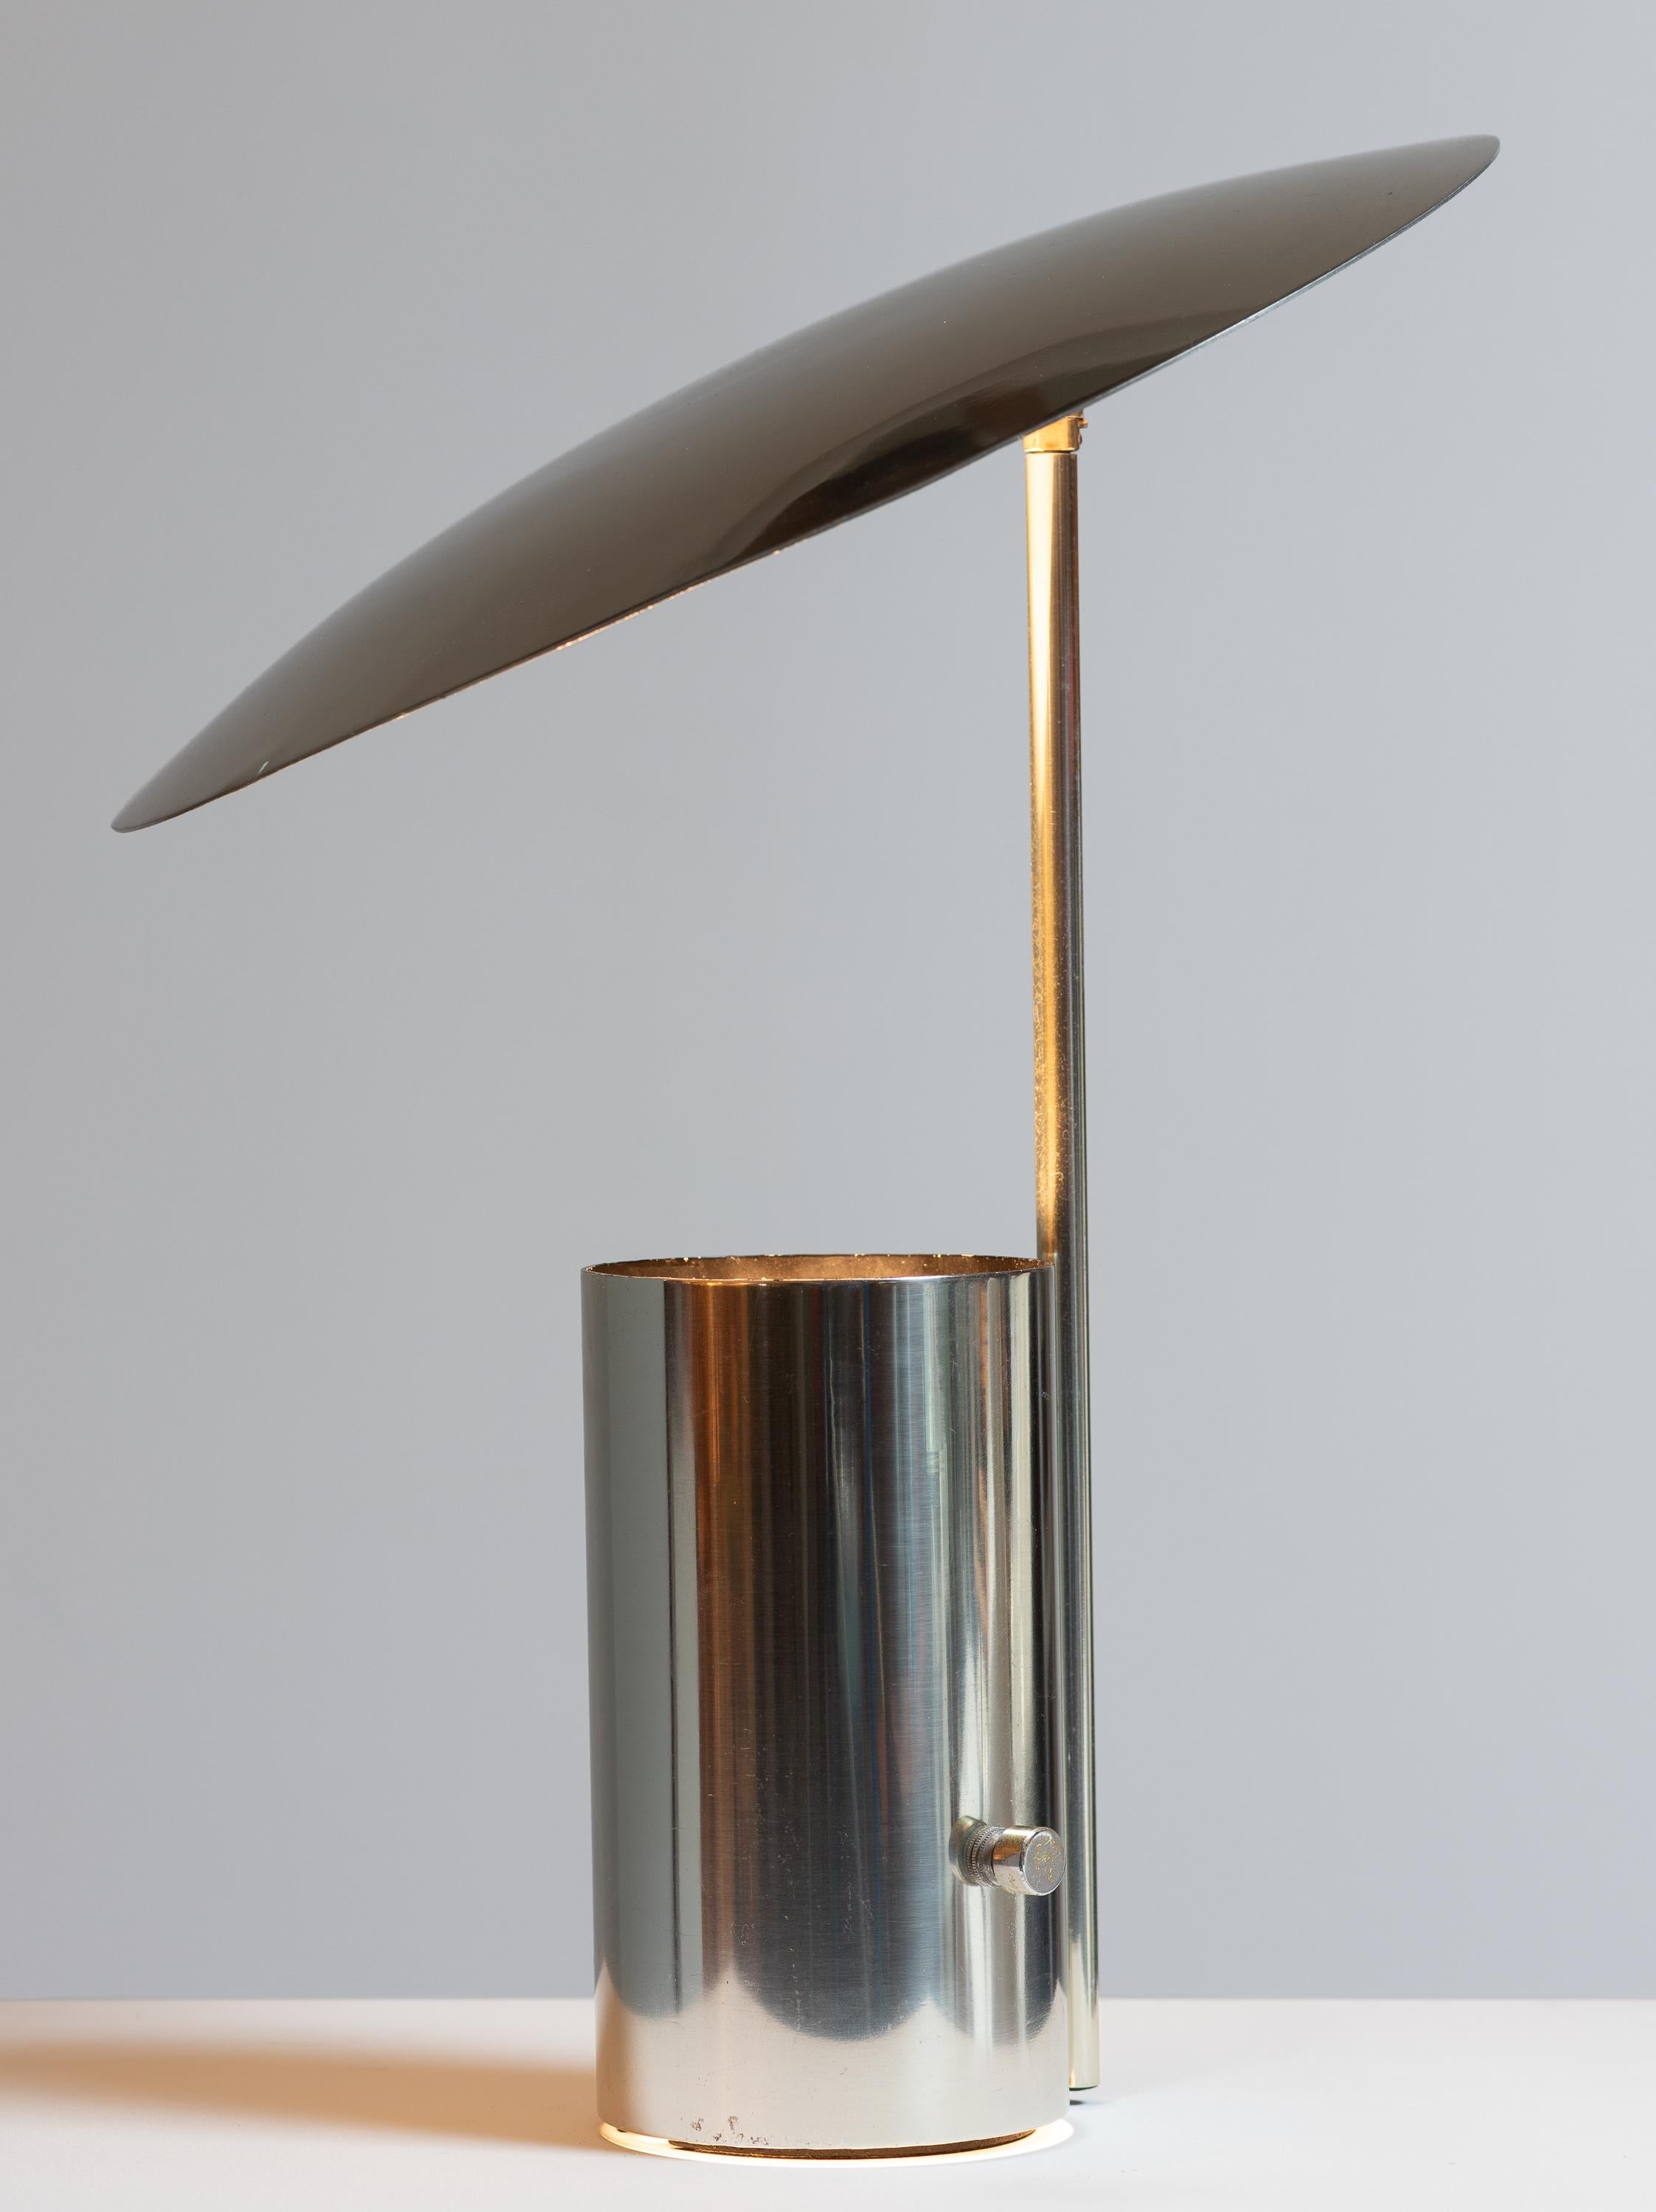 Half Nelson table lamp, designed by George Nelson for Koch and Lowy. A thoughtful design, featuring a pivoting shade made from spun aluminum, that offers customizable illumination. Two-way light source is hidden within the cylindrical base. The